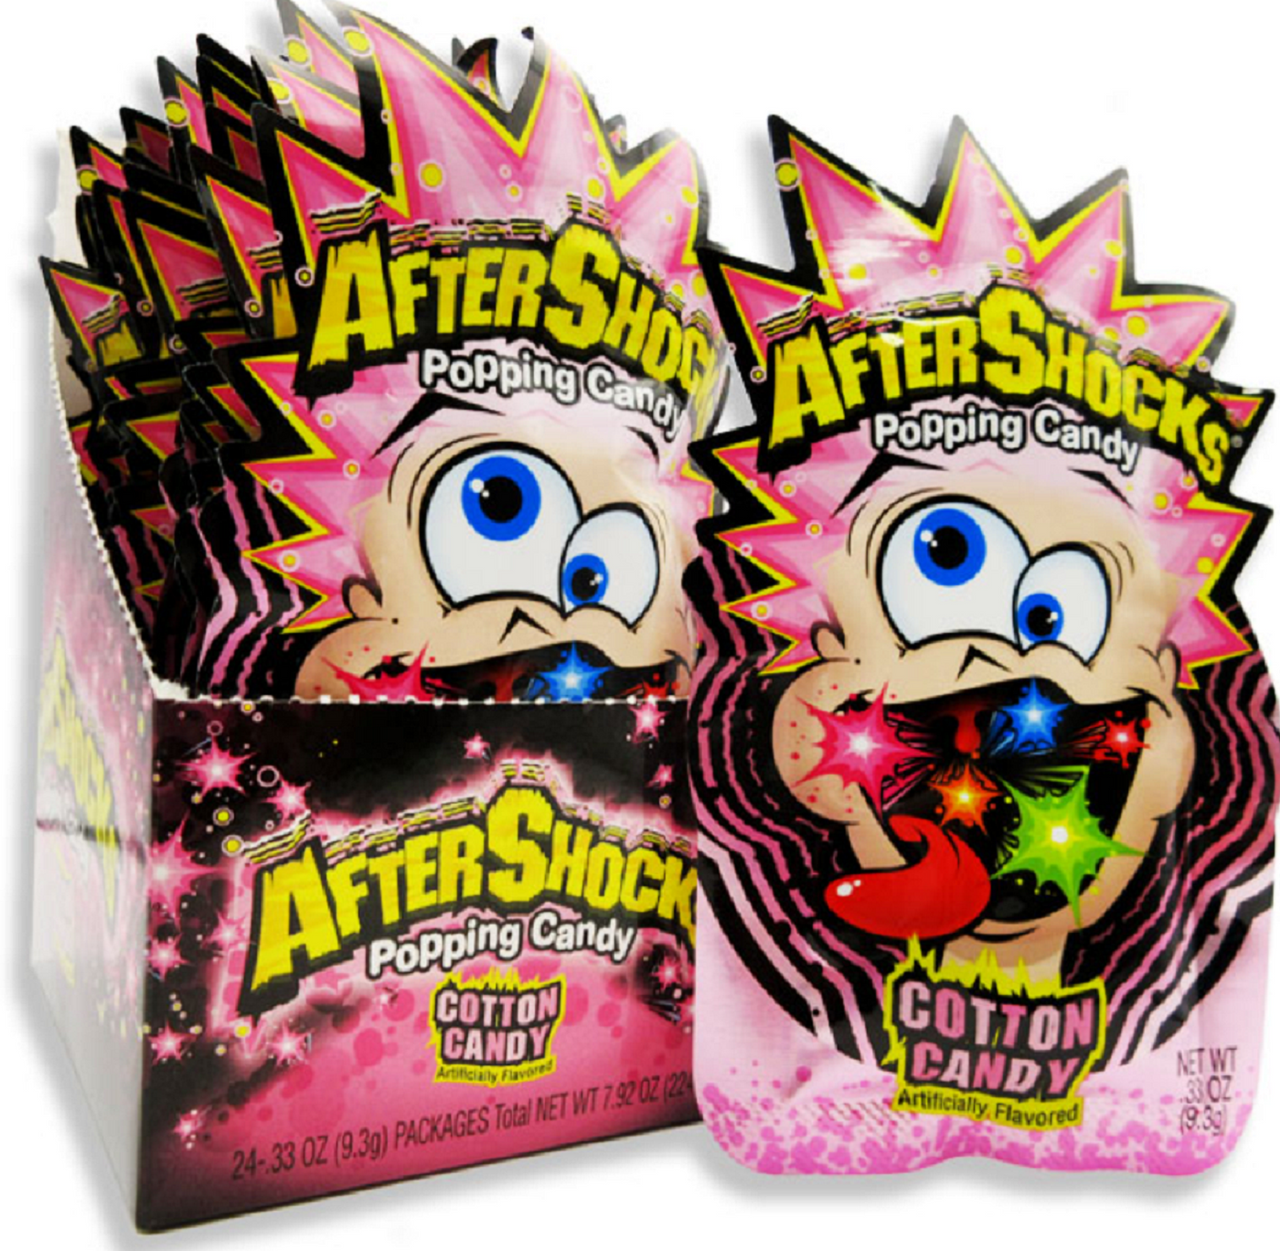 Aftershocks Cotton Candy 0.33oz 24 Count